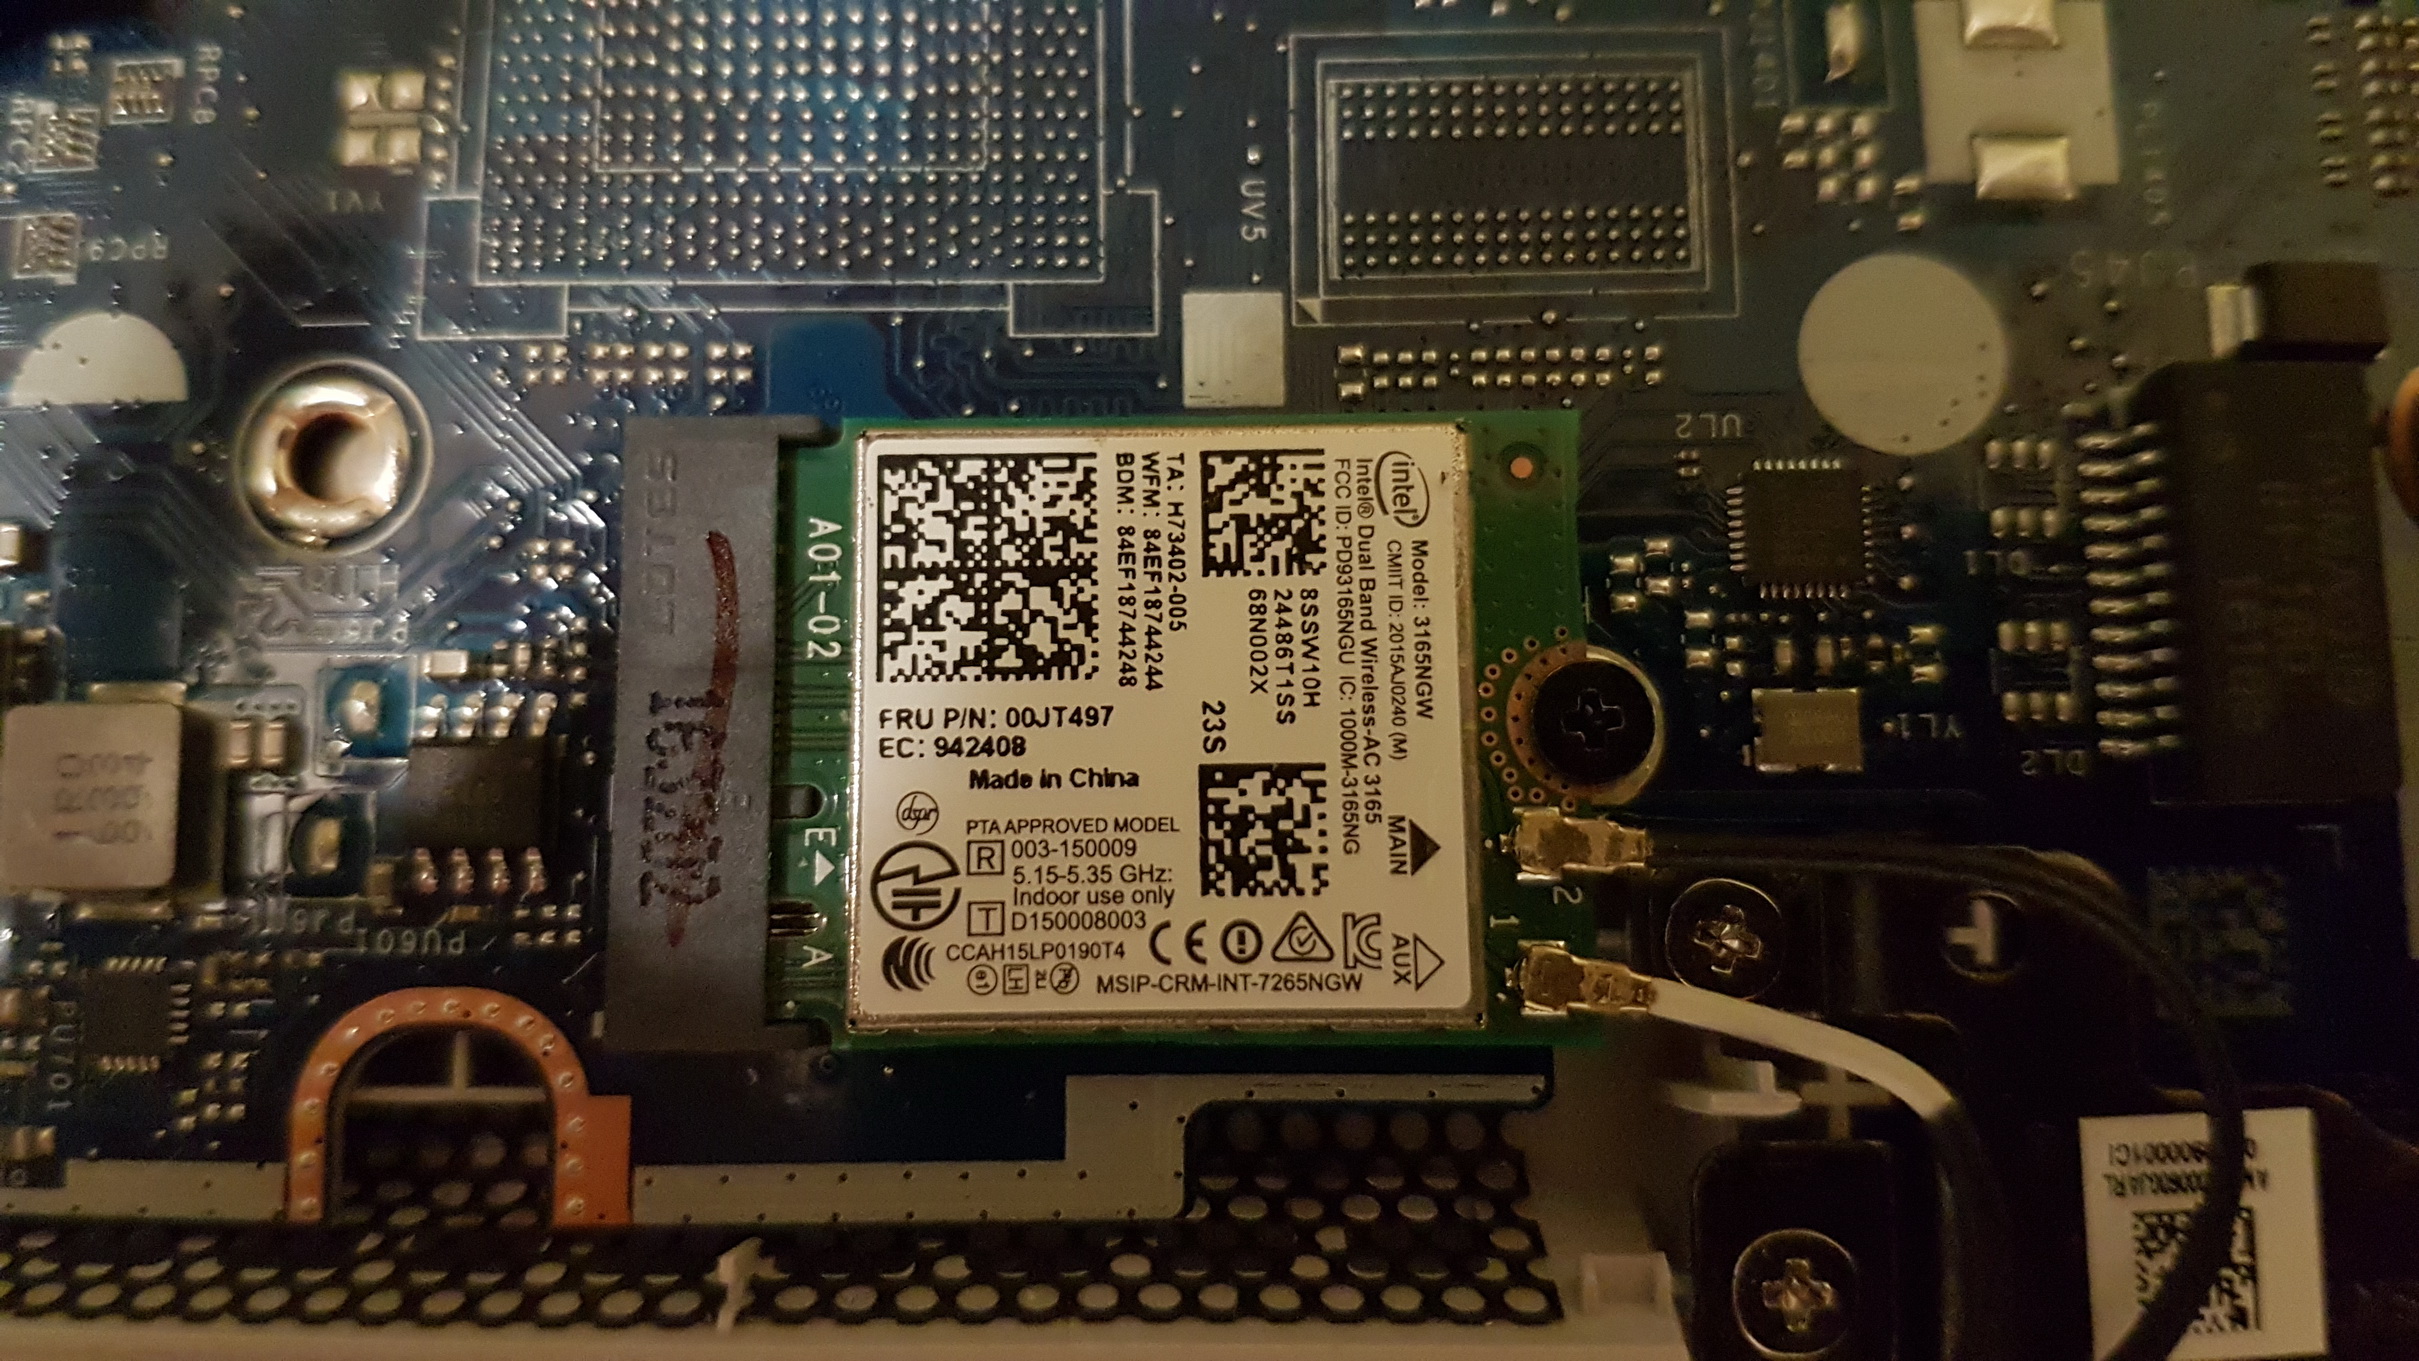 Wireless AC 3165 on my Lenovo Ideapad510S-14IKB will connect only 150  Mbit/s. - Intel Community